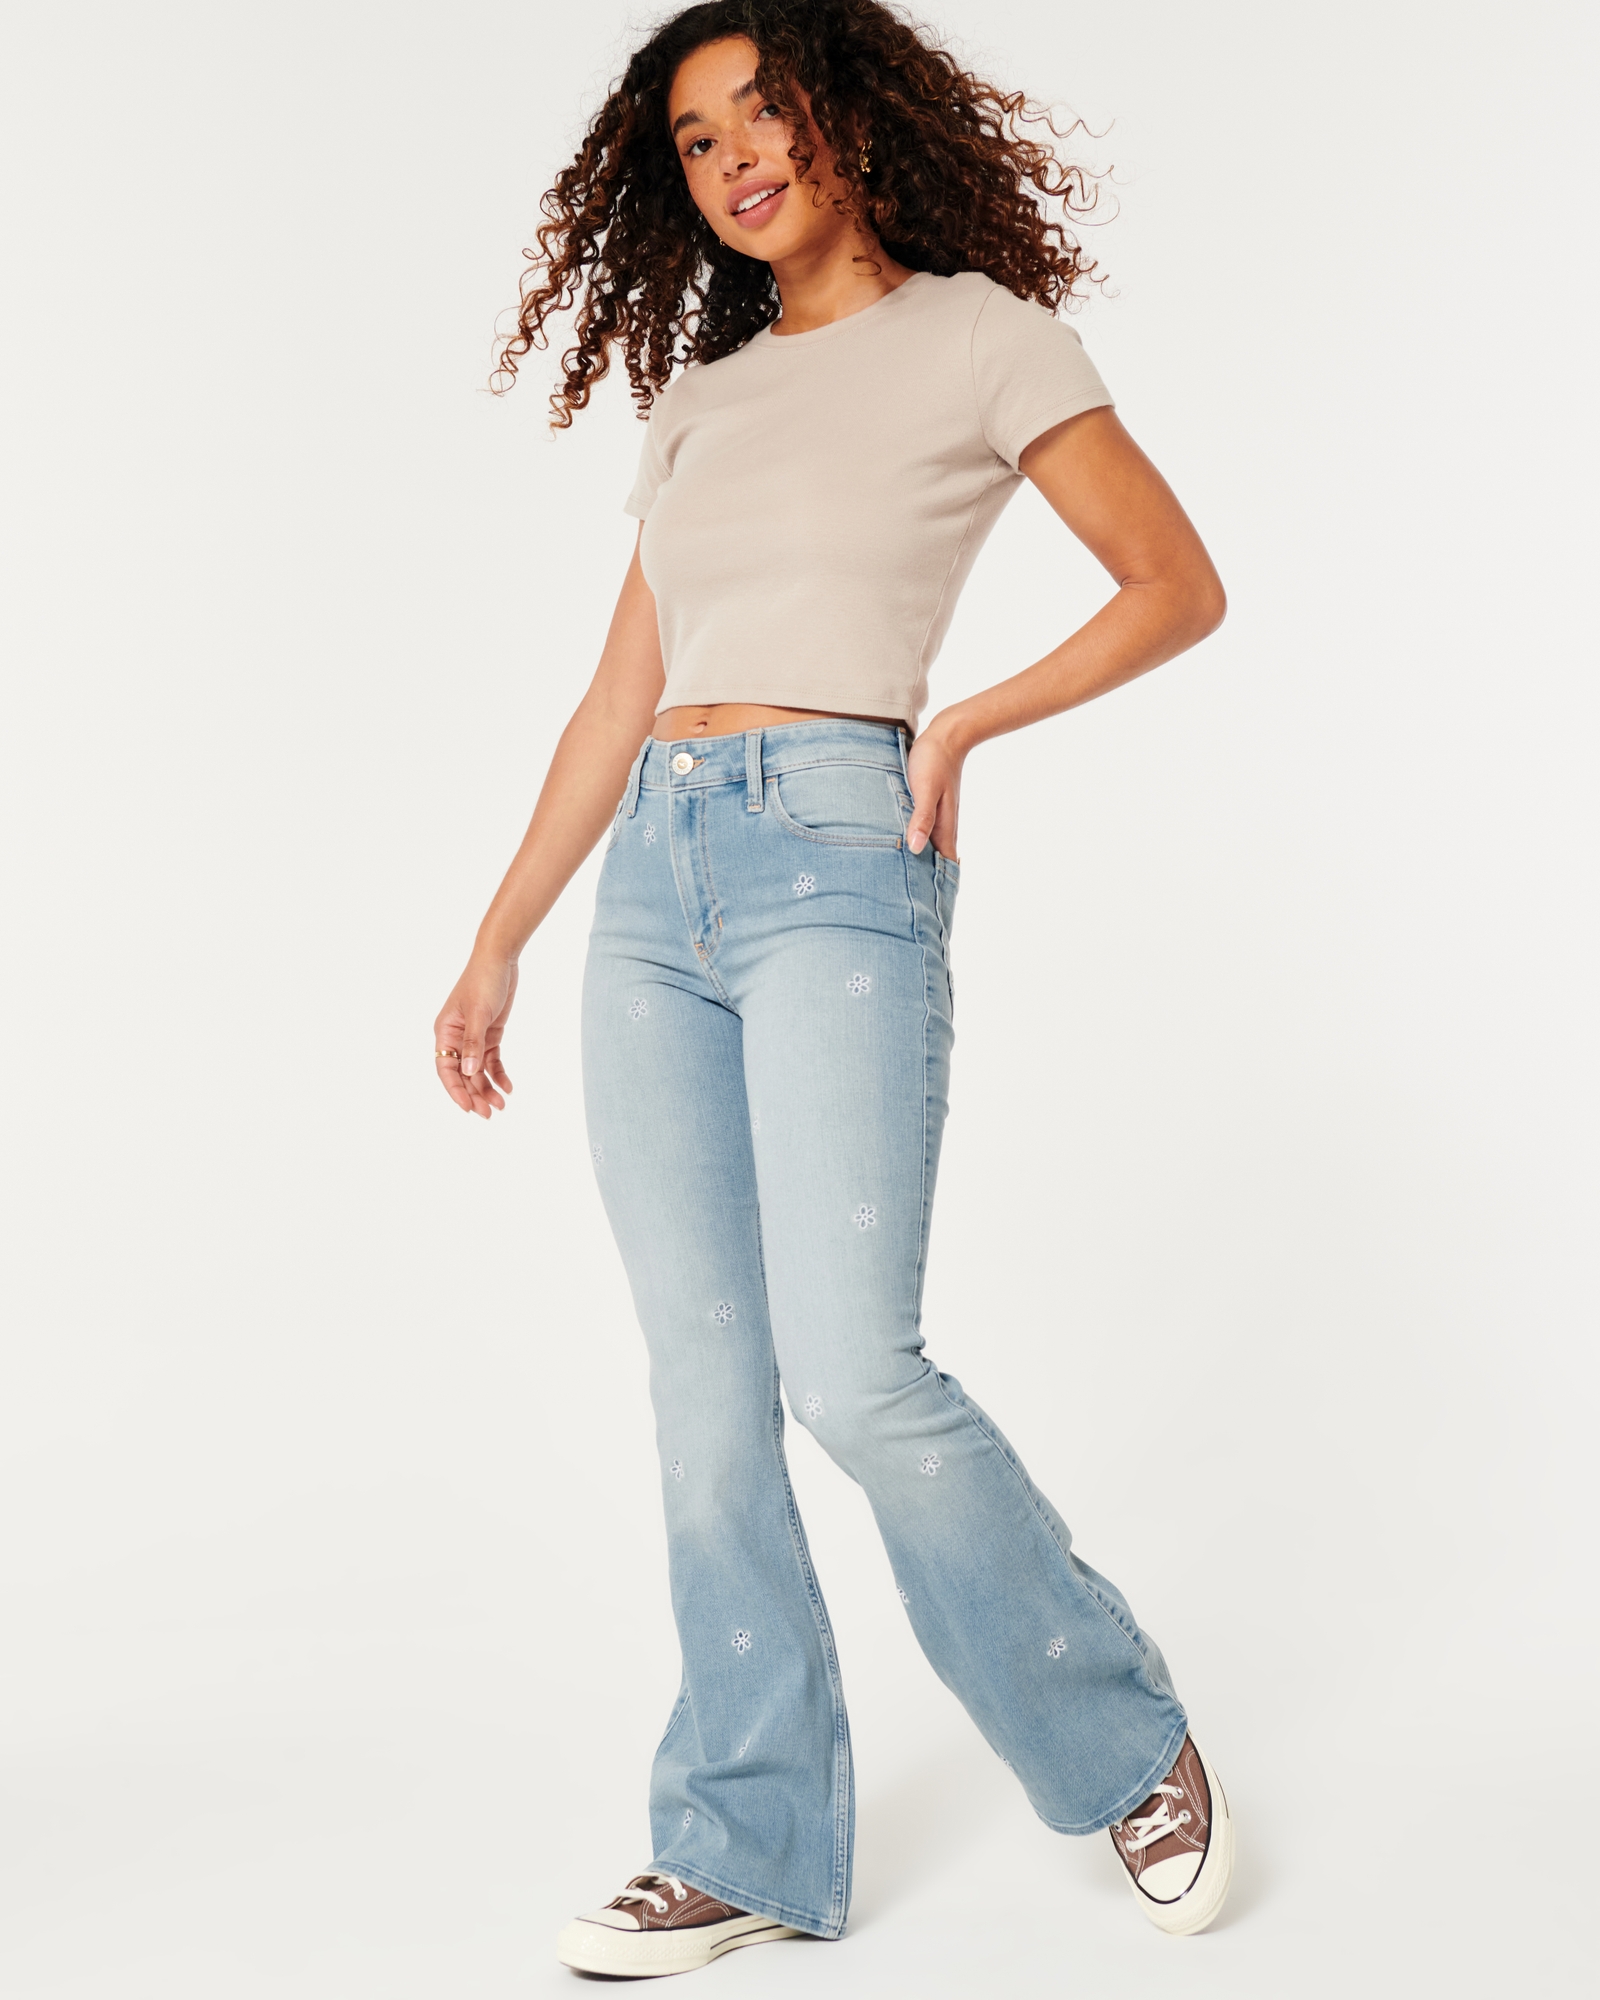 Womens European Denim Back Letters Embroidered Cute Jeans For Women Thin,  Loose Fit, High Waisted, Straight Pants For Spring And Autumn Fashion  210730 From Cong02, $32.71